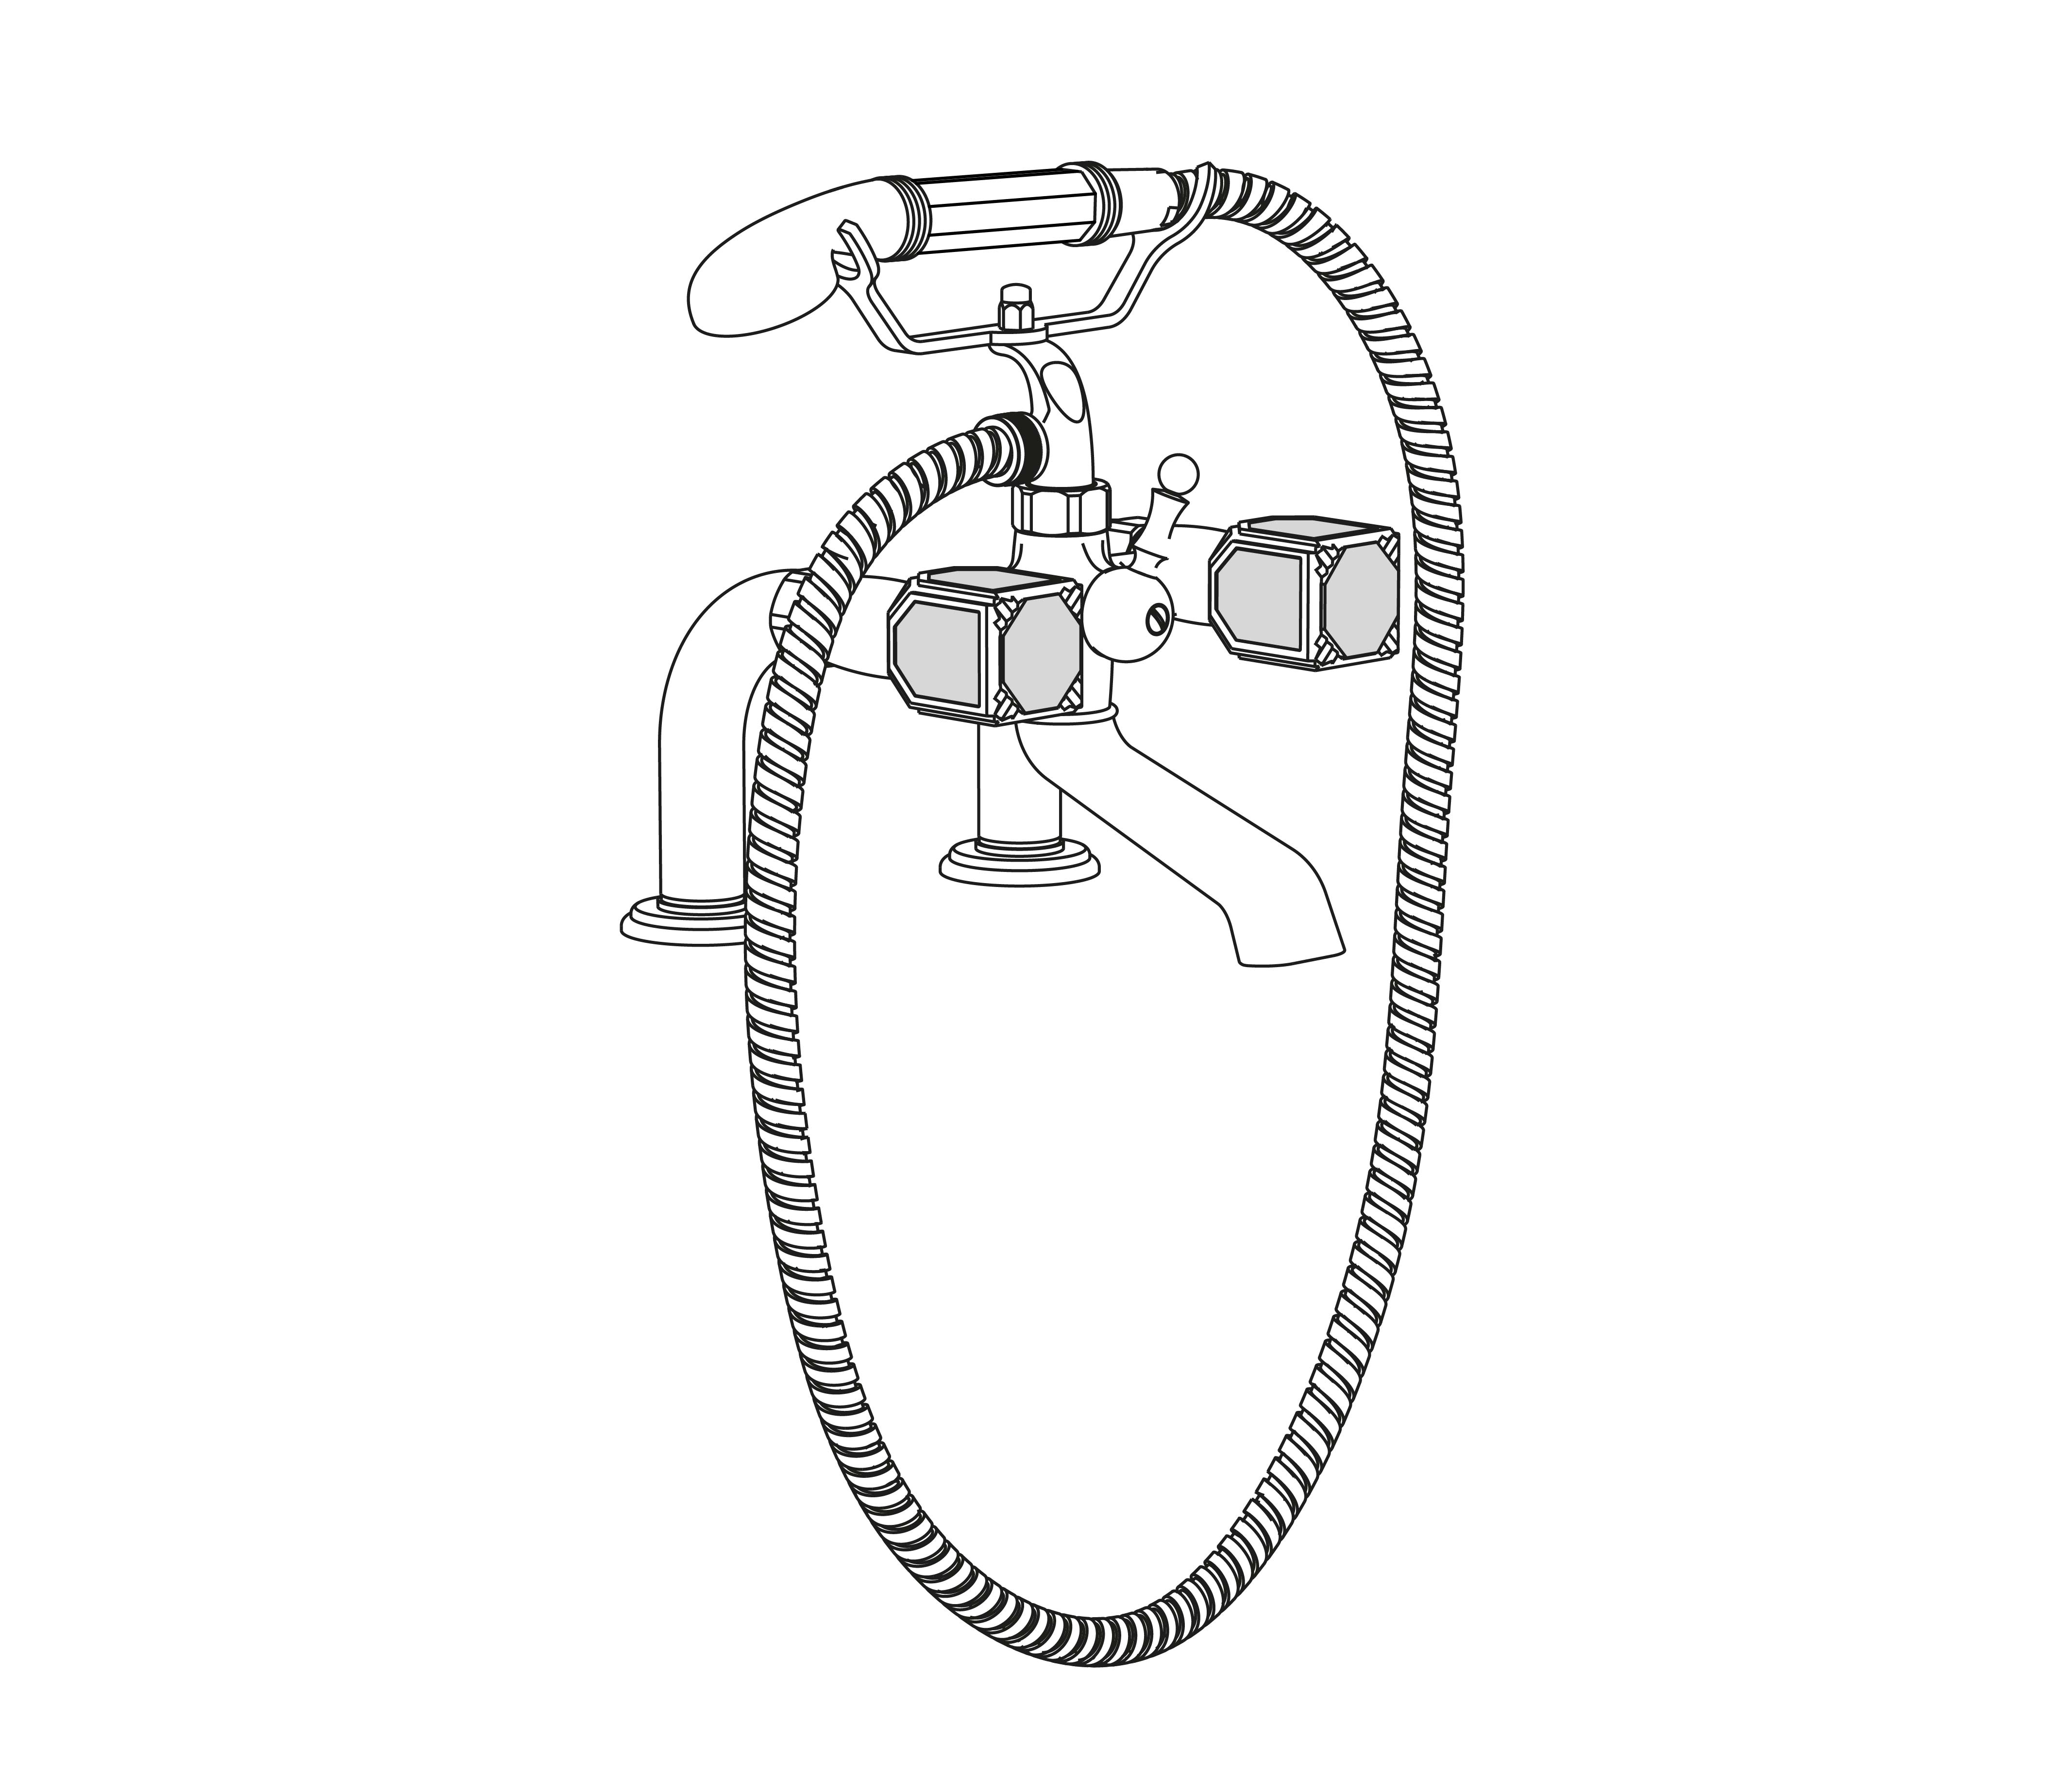 S59-3306 Rim mounted bath and shower mixer